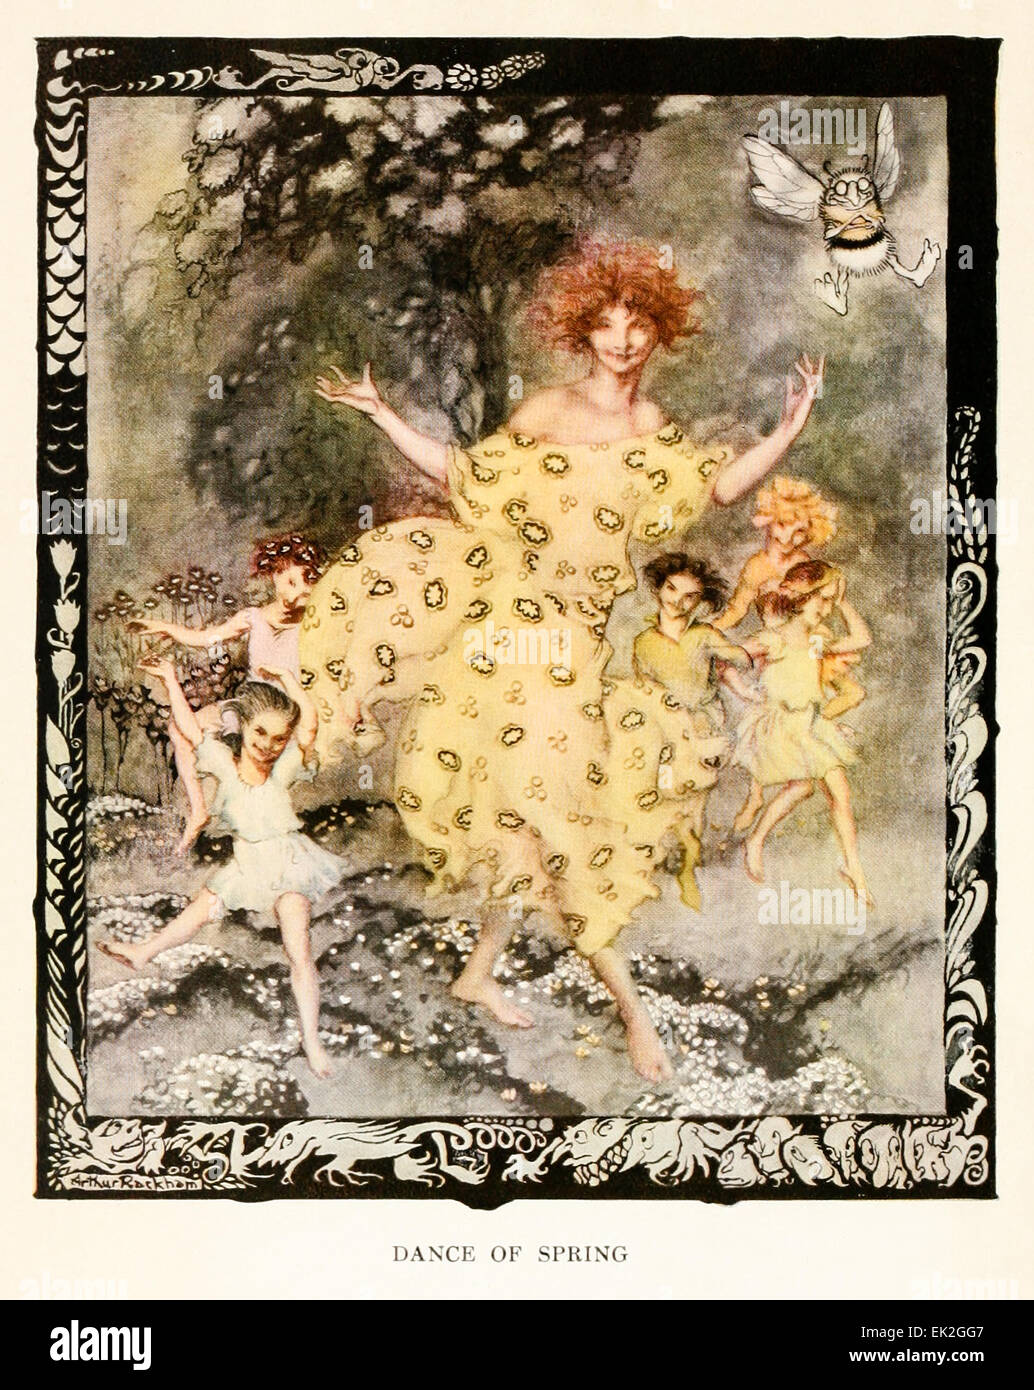 Dance of Spring - Illustration by Arthur Rackham (1867-1939) from ‘Snickerty Nick and the Giant' by Julia Ellsworth Ford (1859-1950). See description for more information. Stock Photo